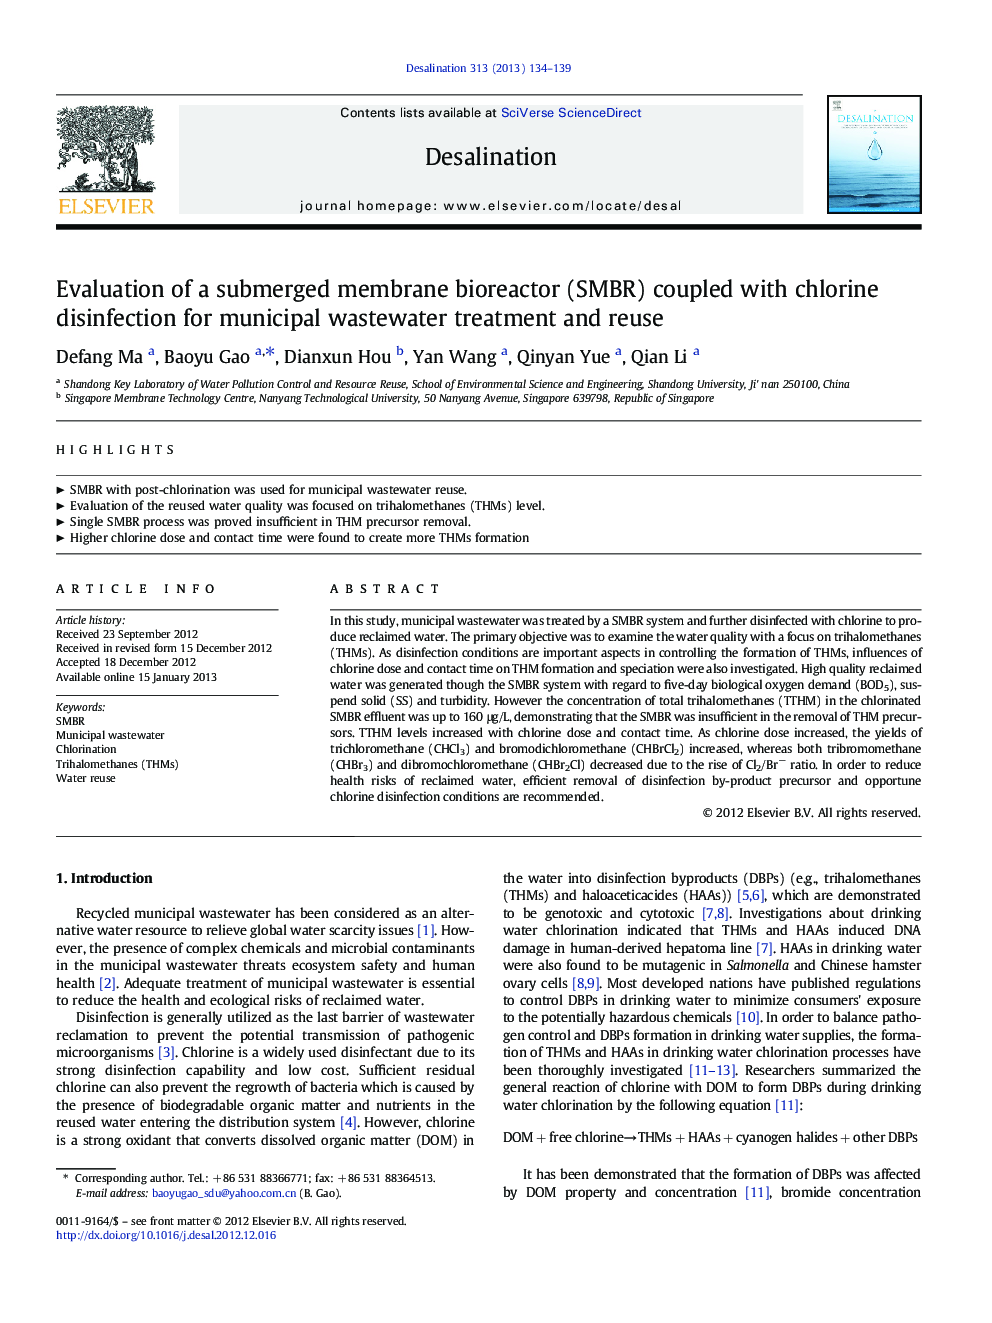 Evaluation of a submerged membrane bioreactor (SMBR) coupled with chlorine disinfection for municipal wastewater treatment and reuse